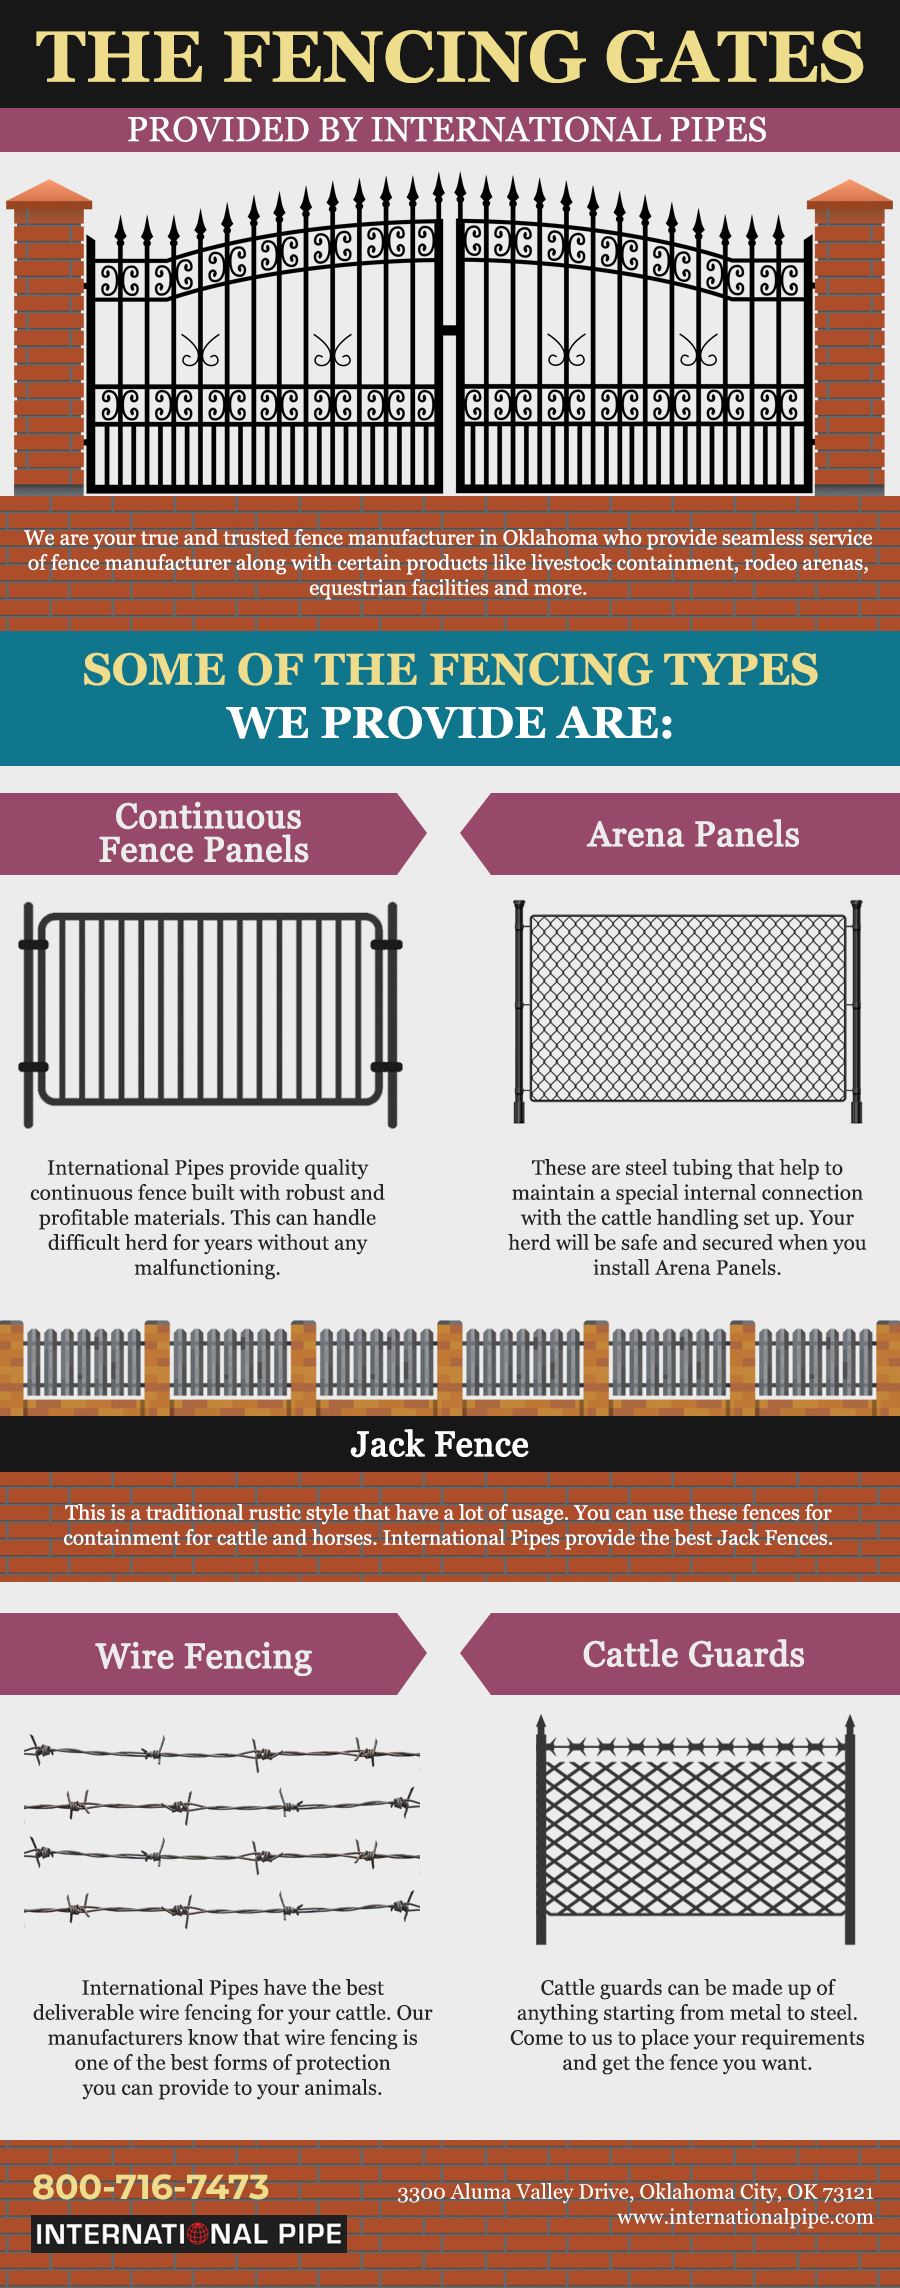 The Fencing Gates Provided By International Pipes